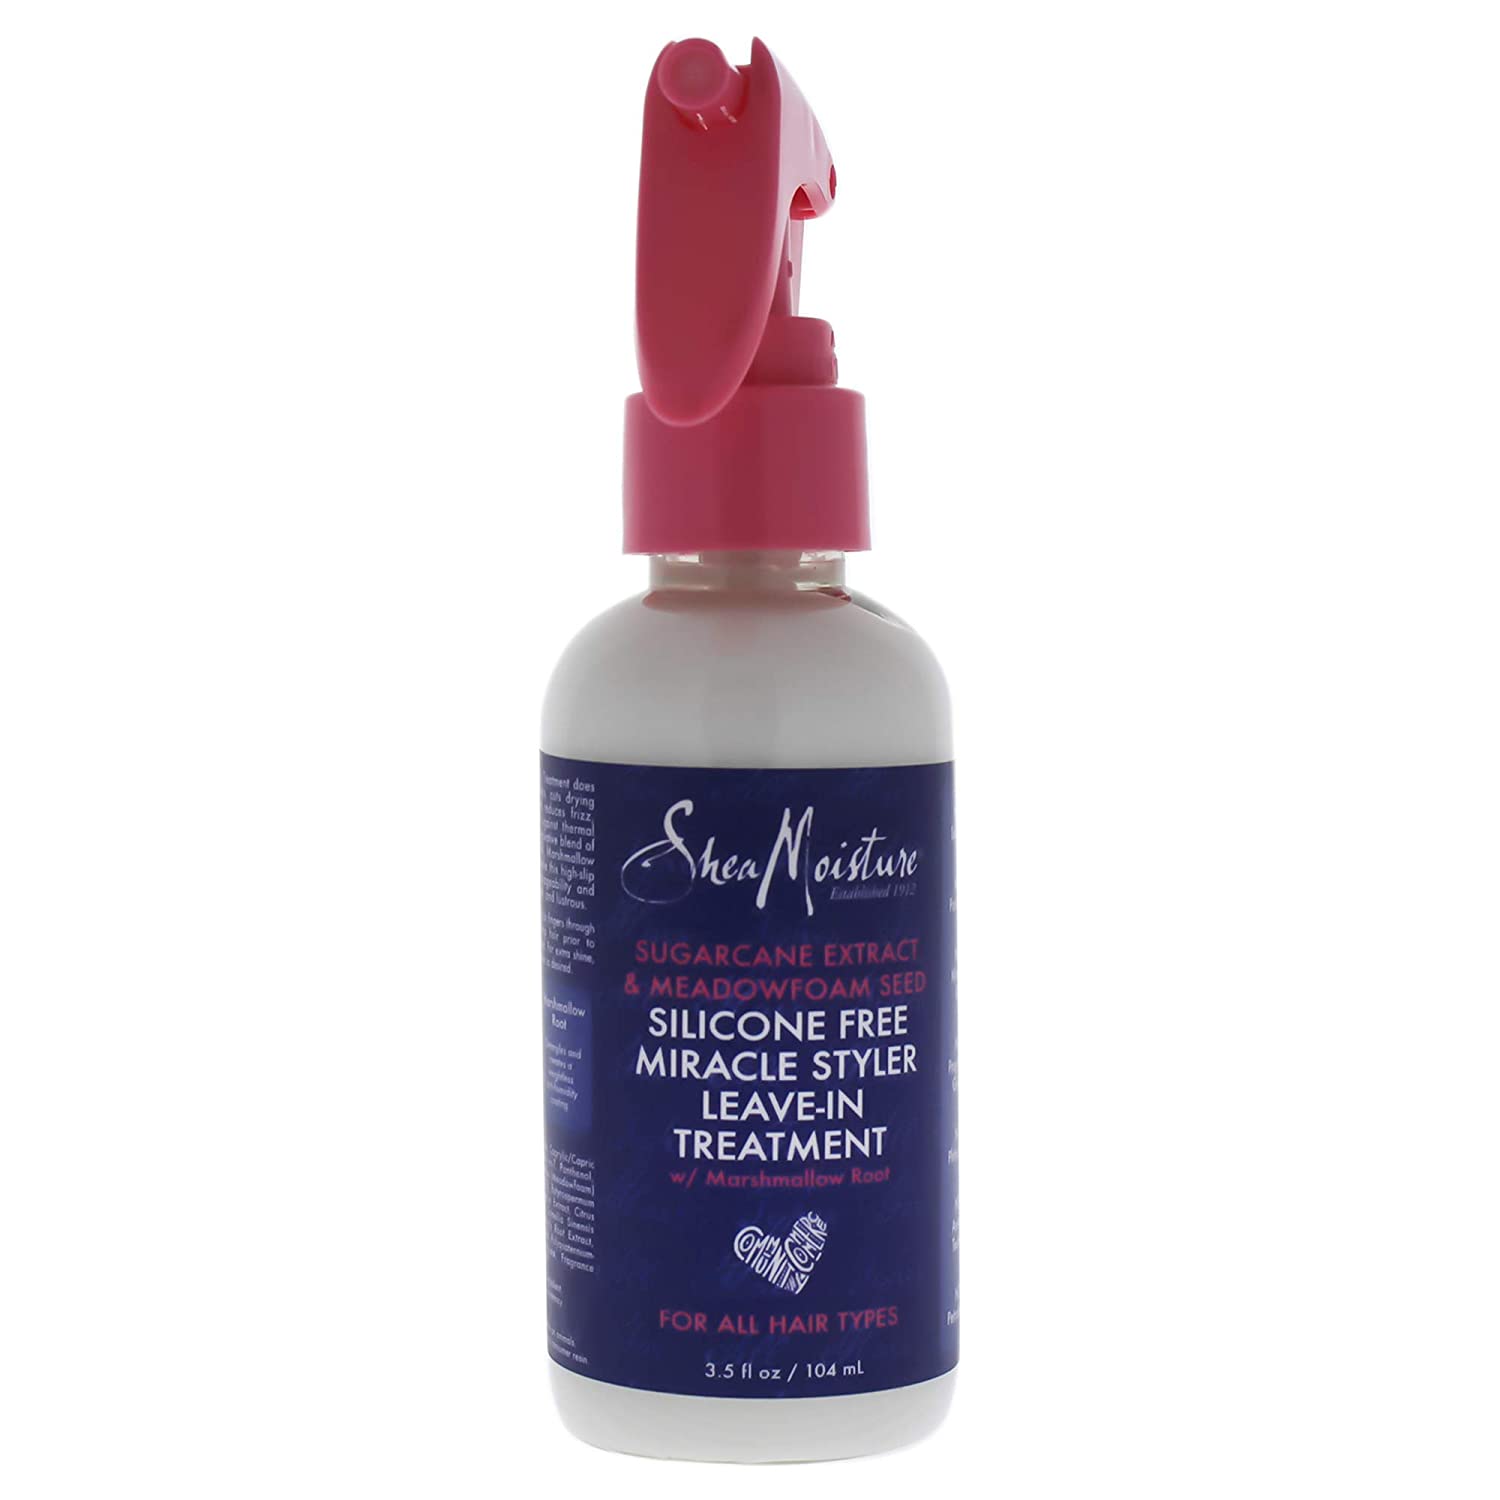 Shea Moisture silicone free miracle styler leave in treatment- 101 ml